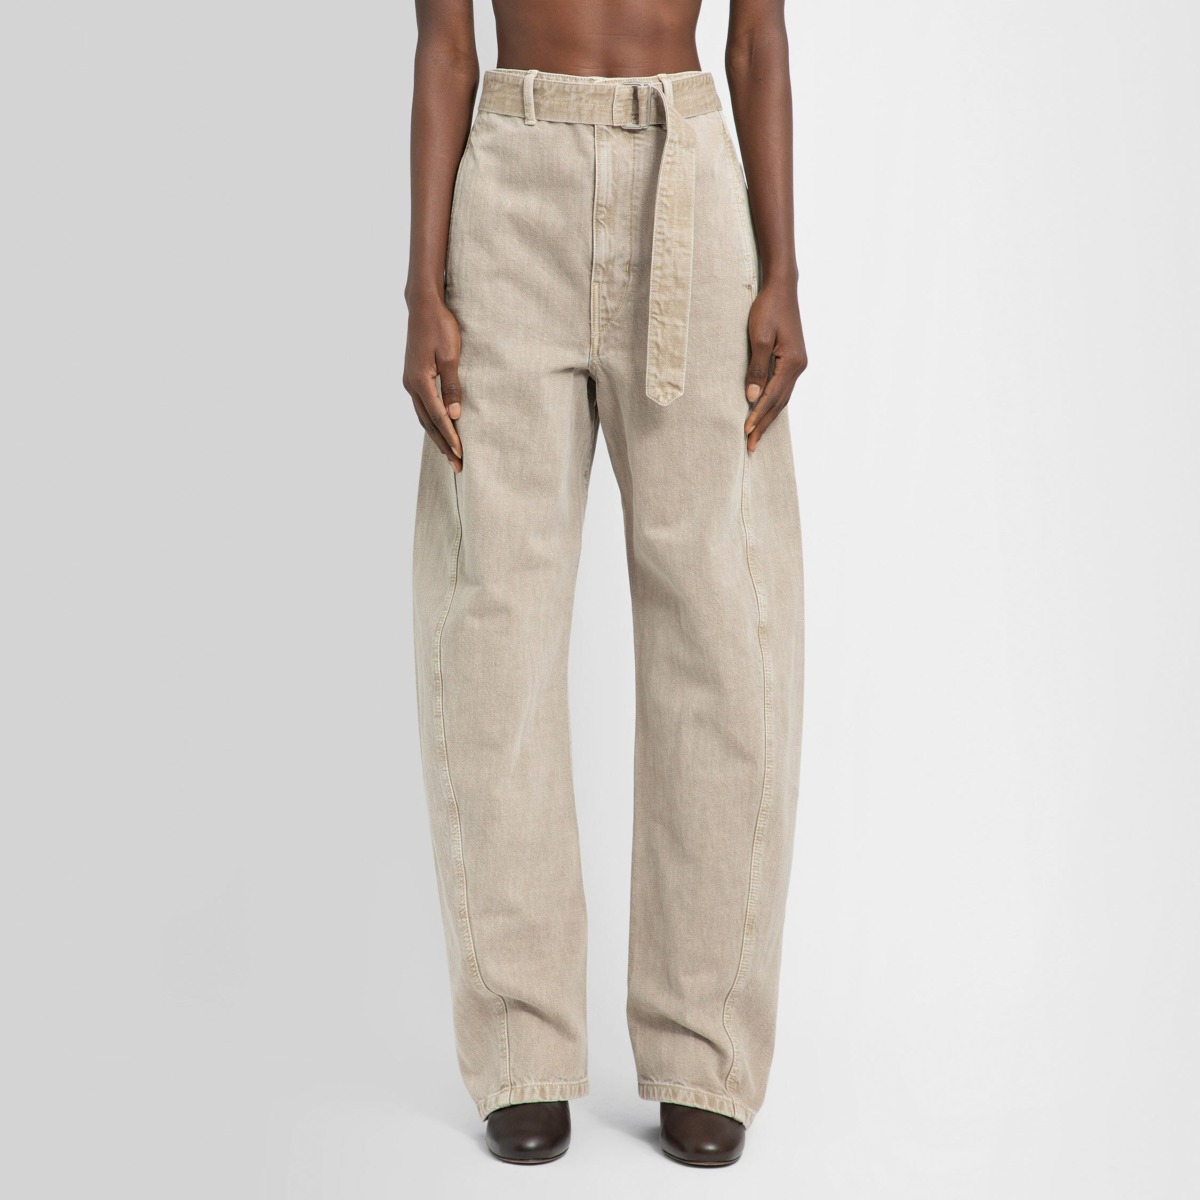 Lemaire - Woman Jeans in Beige by Antonioli GOOFASH